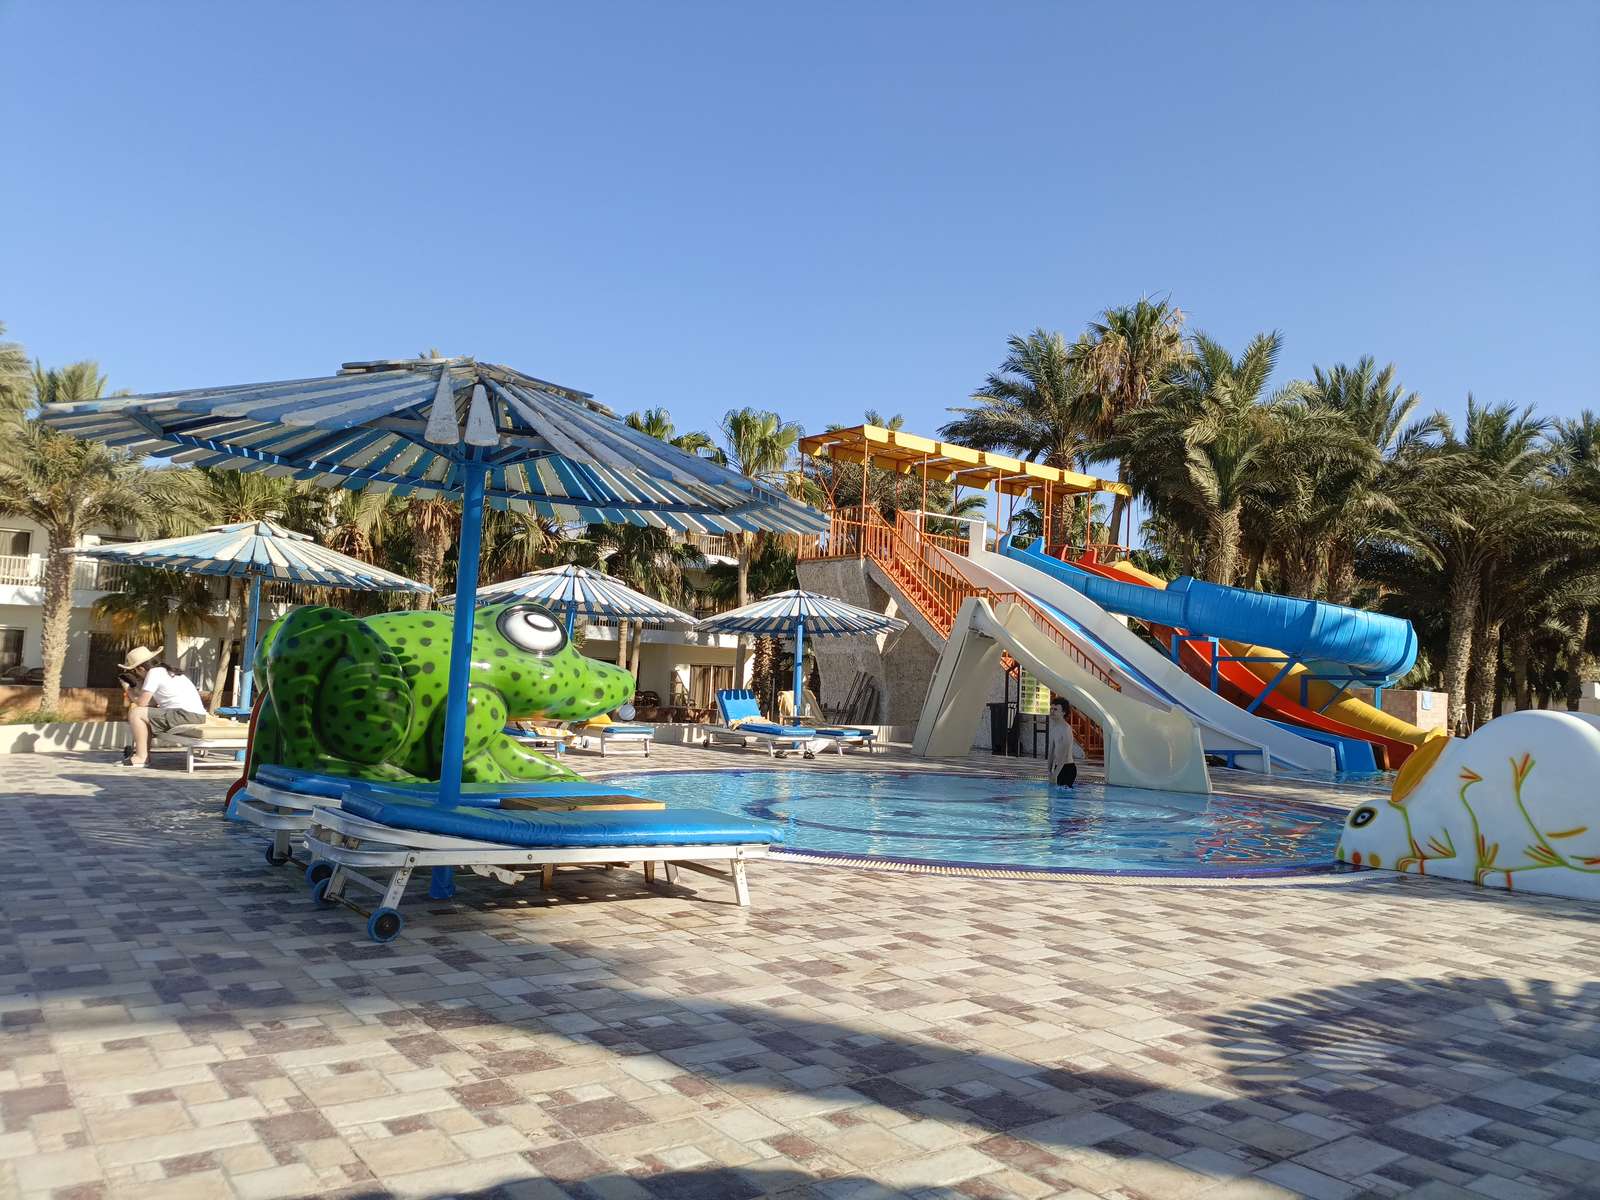 Schwimmbad in Hurghada Online-Puzzle